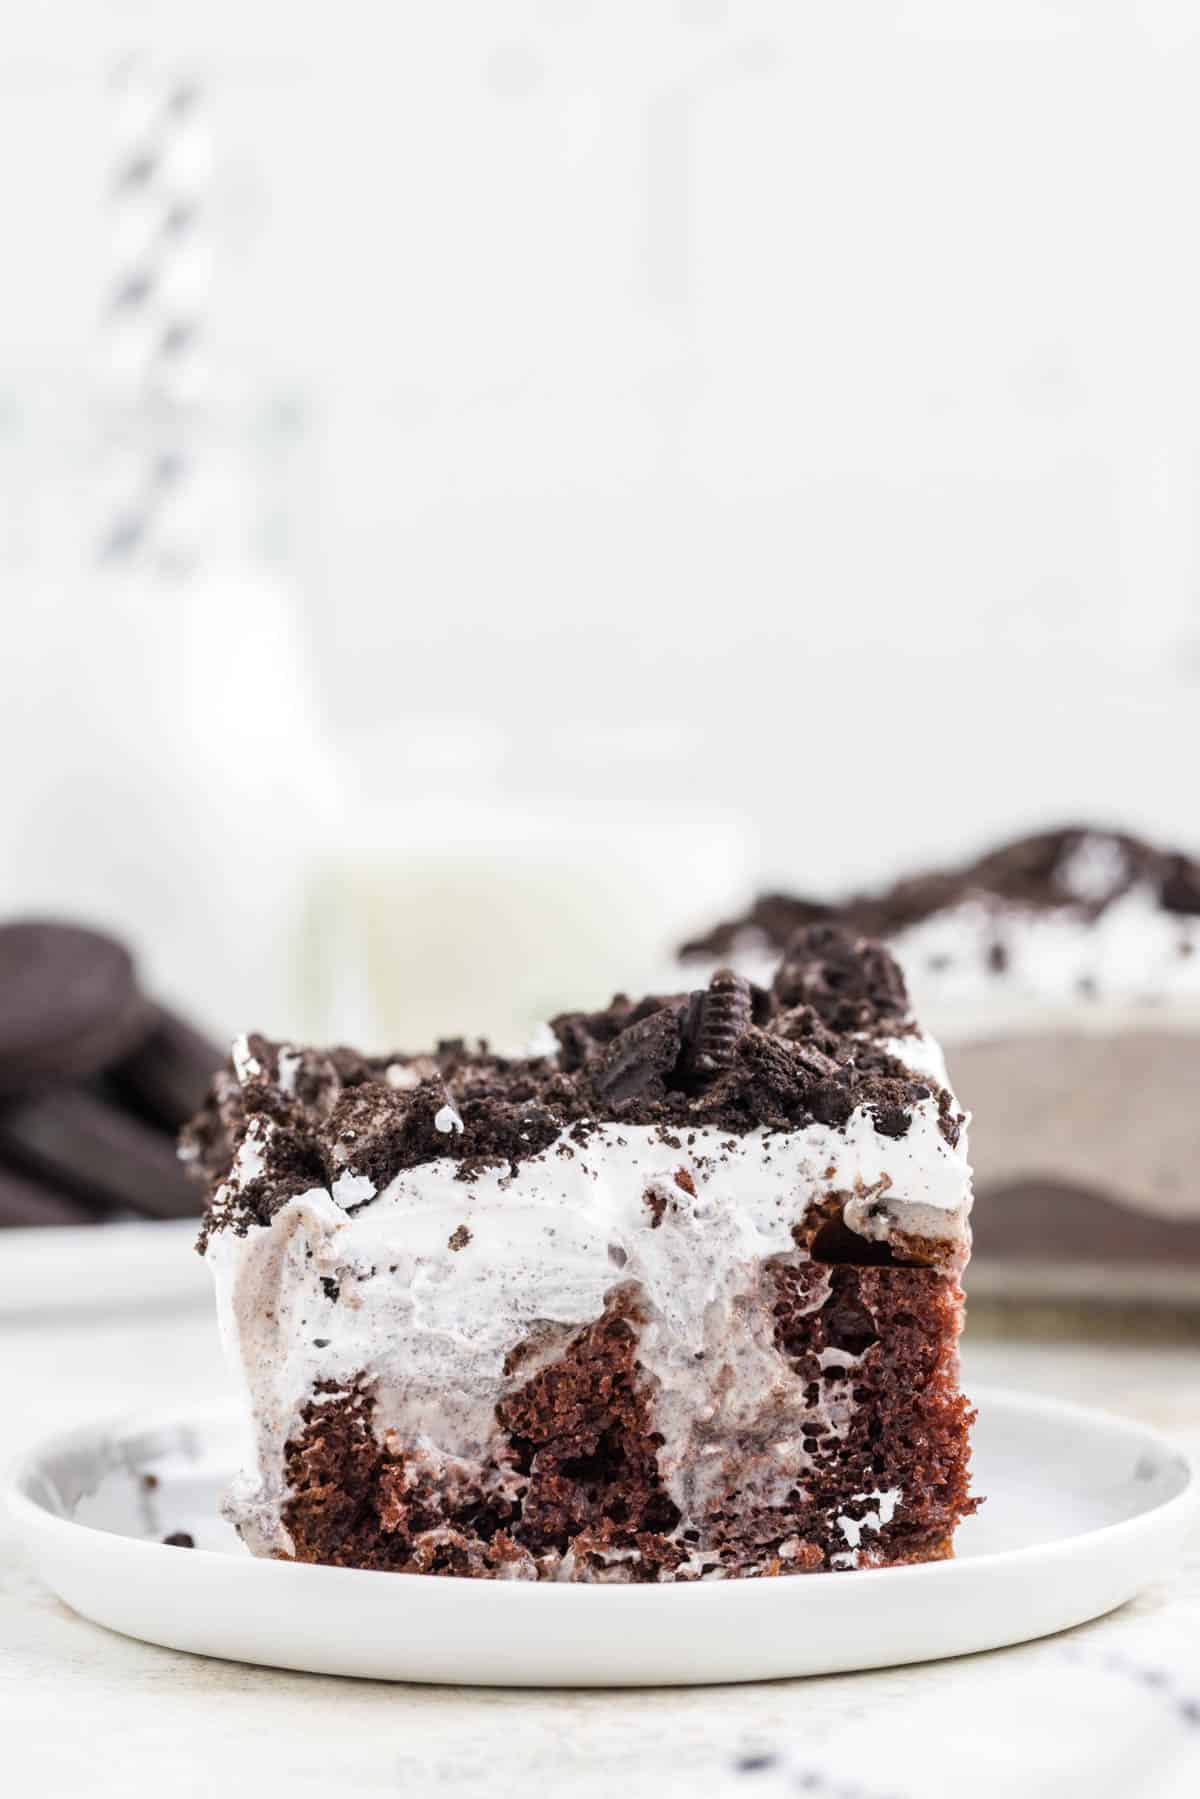 Oreo Poke Cake is a a simple but decadent cake recipe made with boxed chocolate cake mix, Oreo cookies n' creme pudding mix, milk, Cool Whip and Oreo cookies.